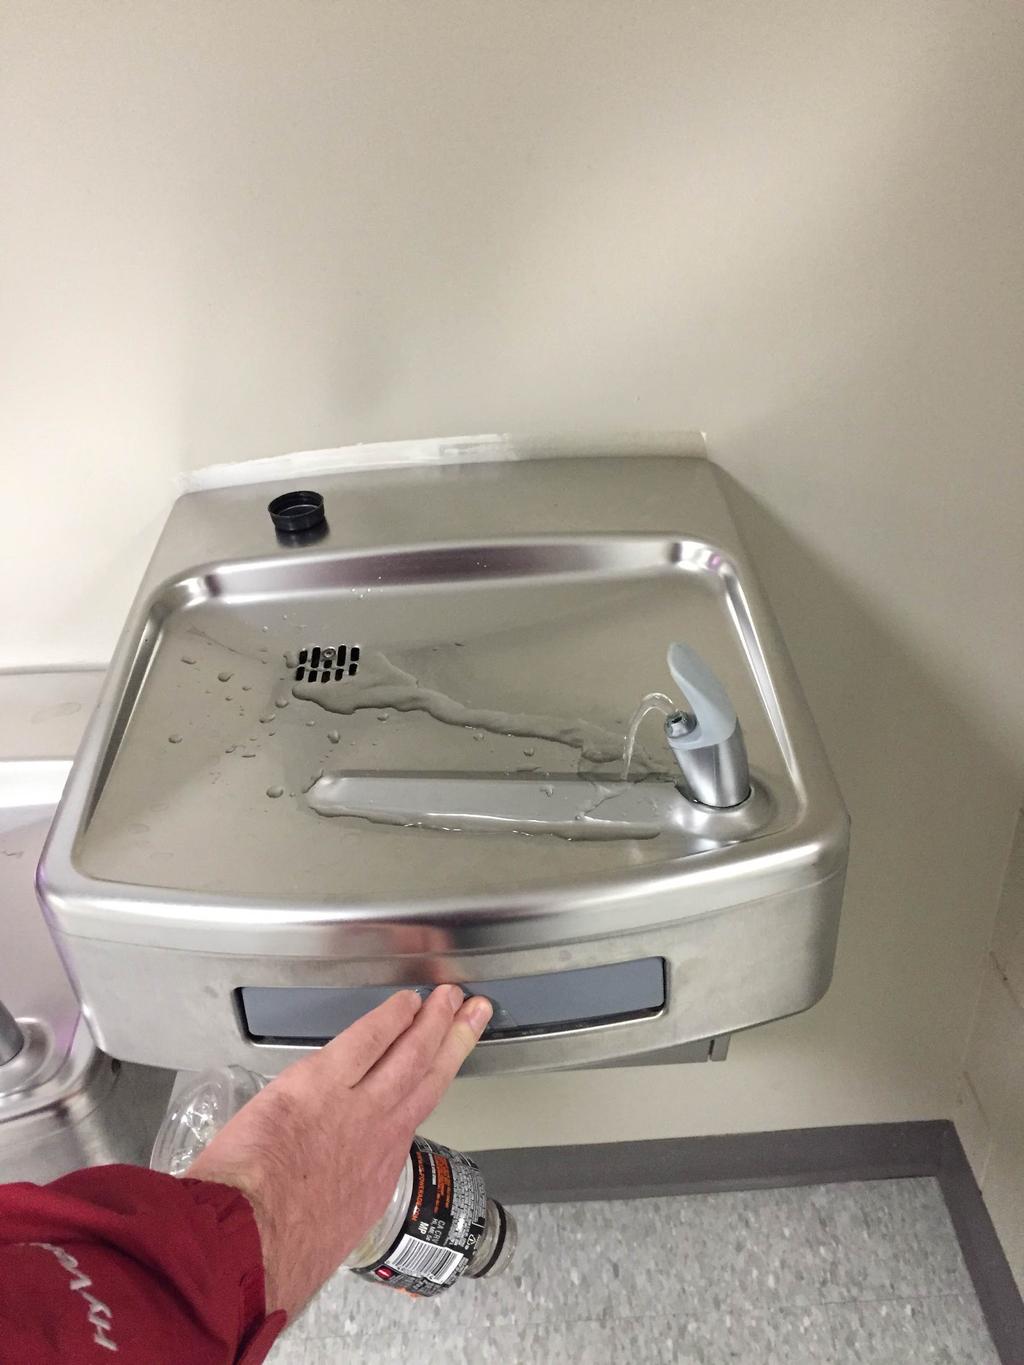 This is the absolute worst water fountain I was able to find on campus and it's disappointing because it's in the science center and is one of the newer ones.